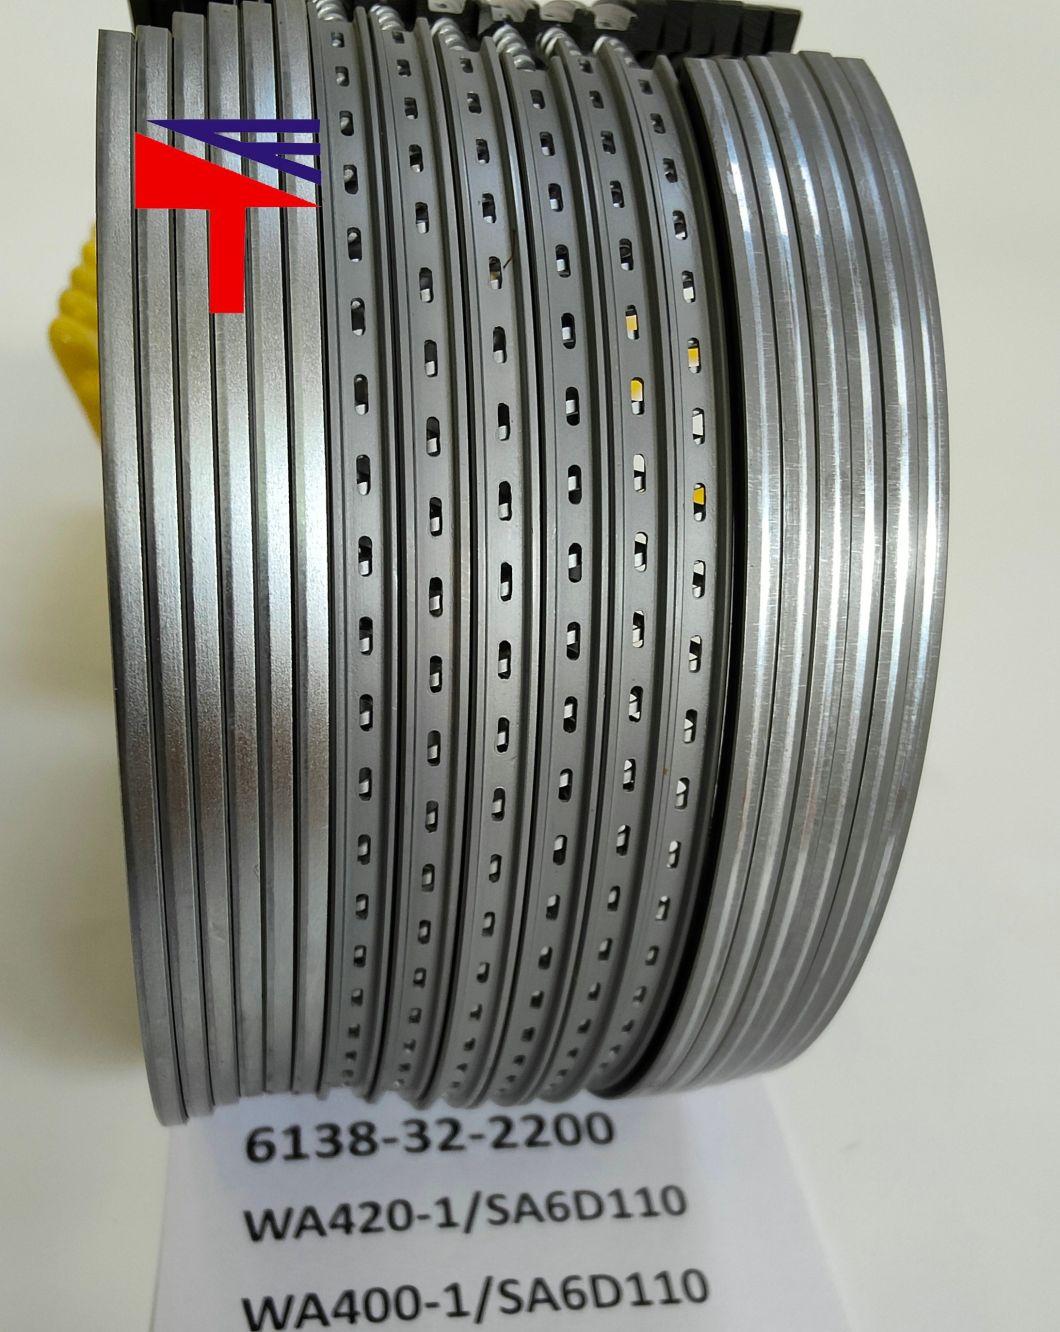 High Quality Diesel Engine Mechanical Parts Piston Ring 6138-32-2200 for Wheel Loaders Parts Wa400-1 Wa420-1 Engine Parst S6d110 Generator Set